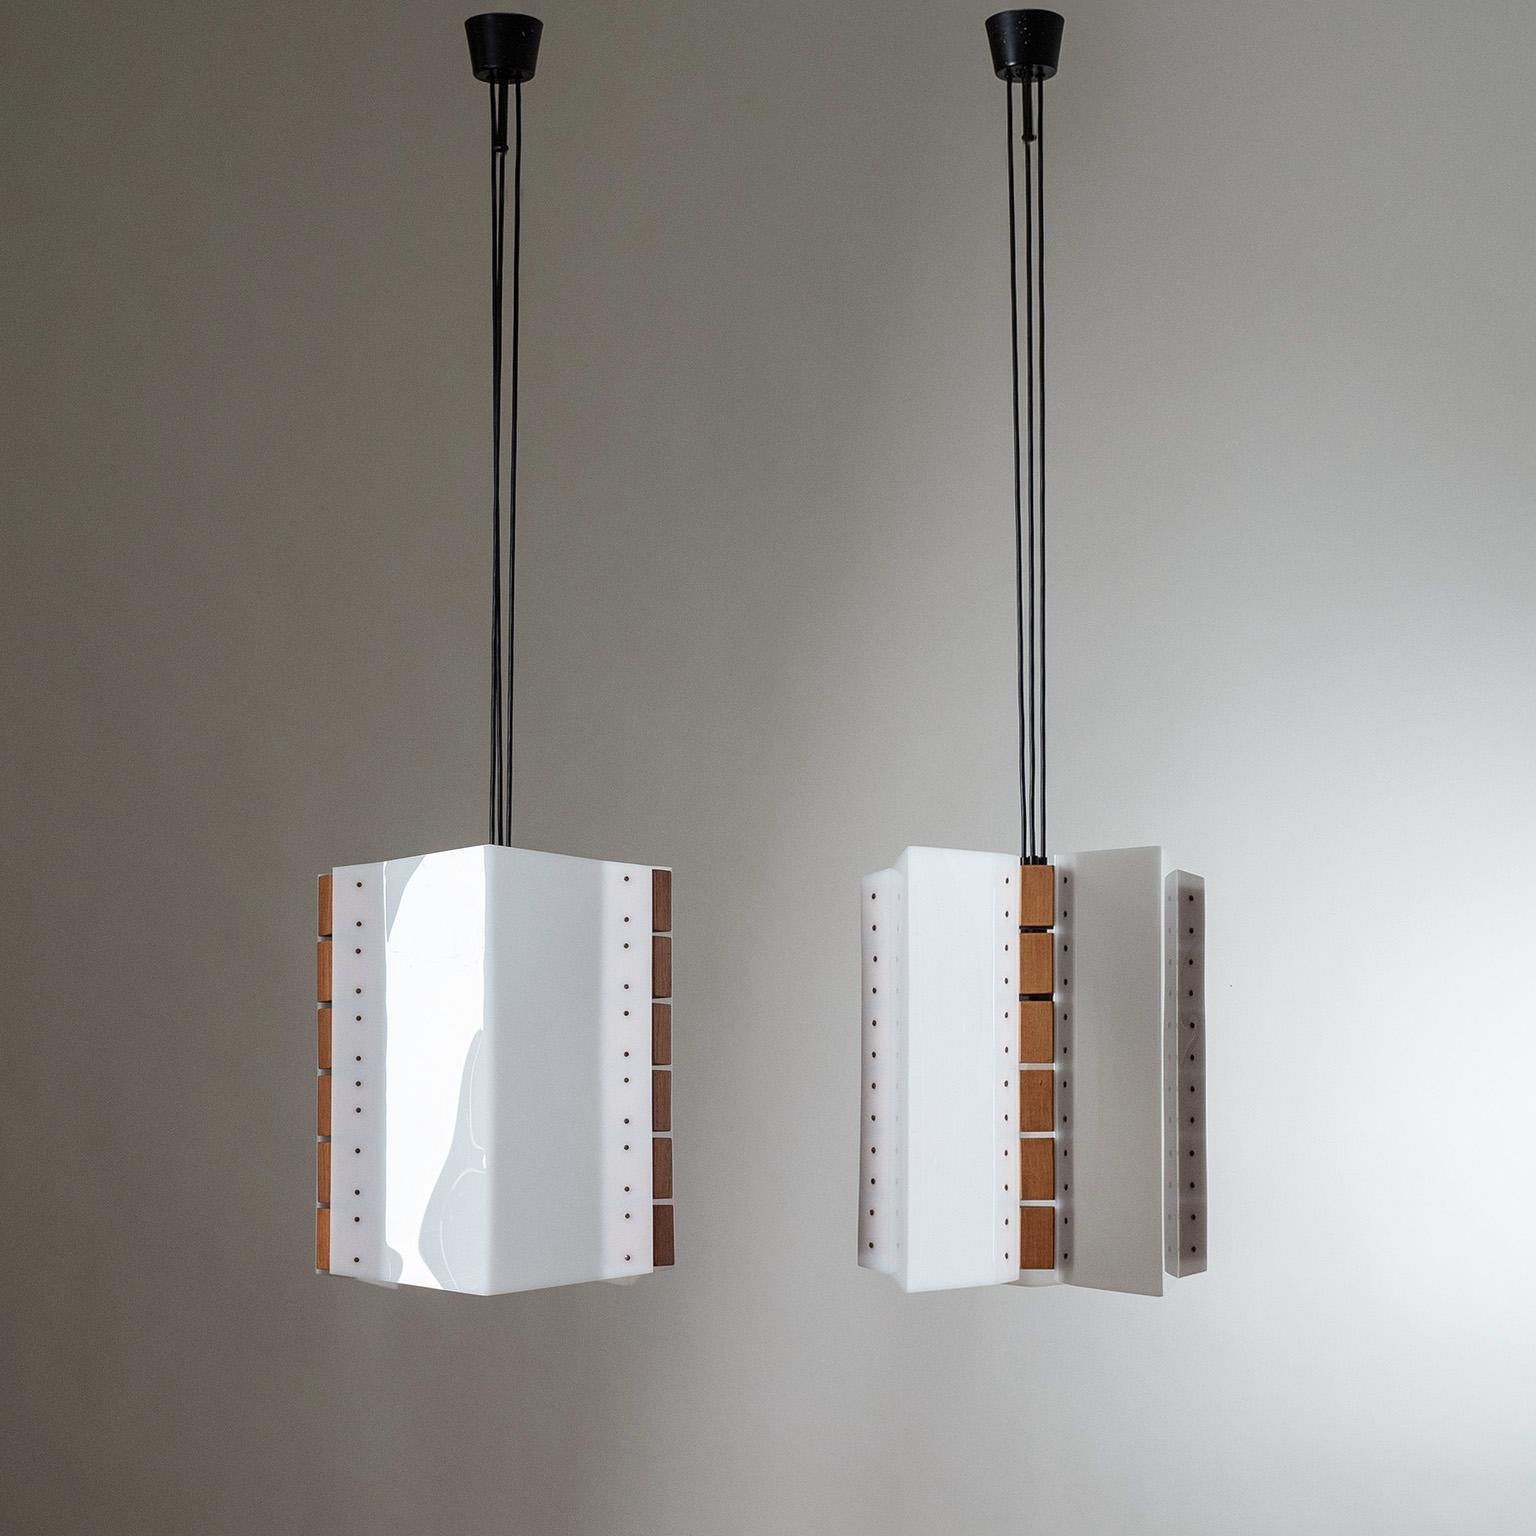 Rare pair of large Italian pendants from the 1960s. The body is composed of three triangular-shaped acrylic sheets joined together by teak blocks and suspended by the wires which lead to three E27 sockets. Very good original condition with minimal